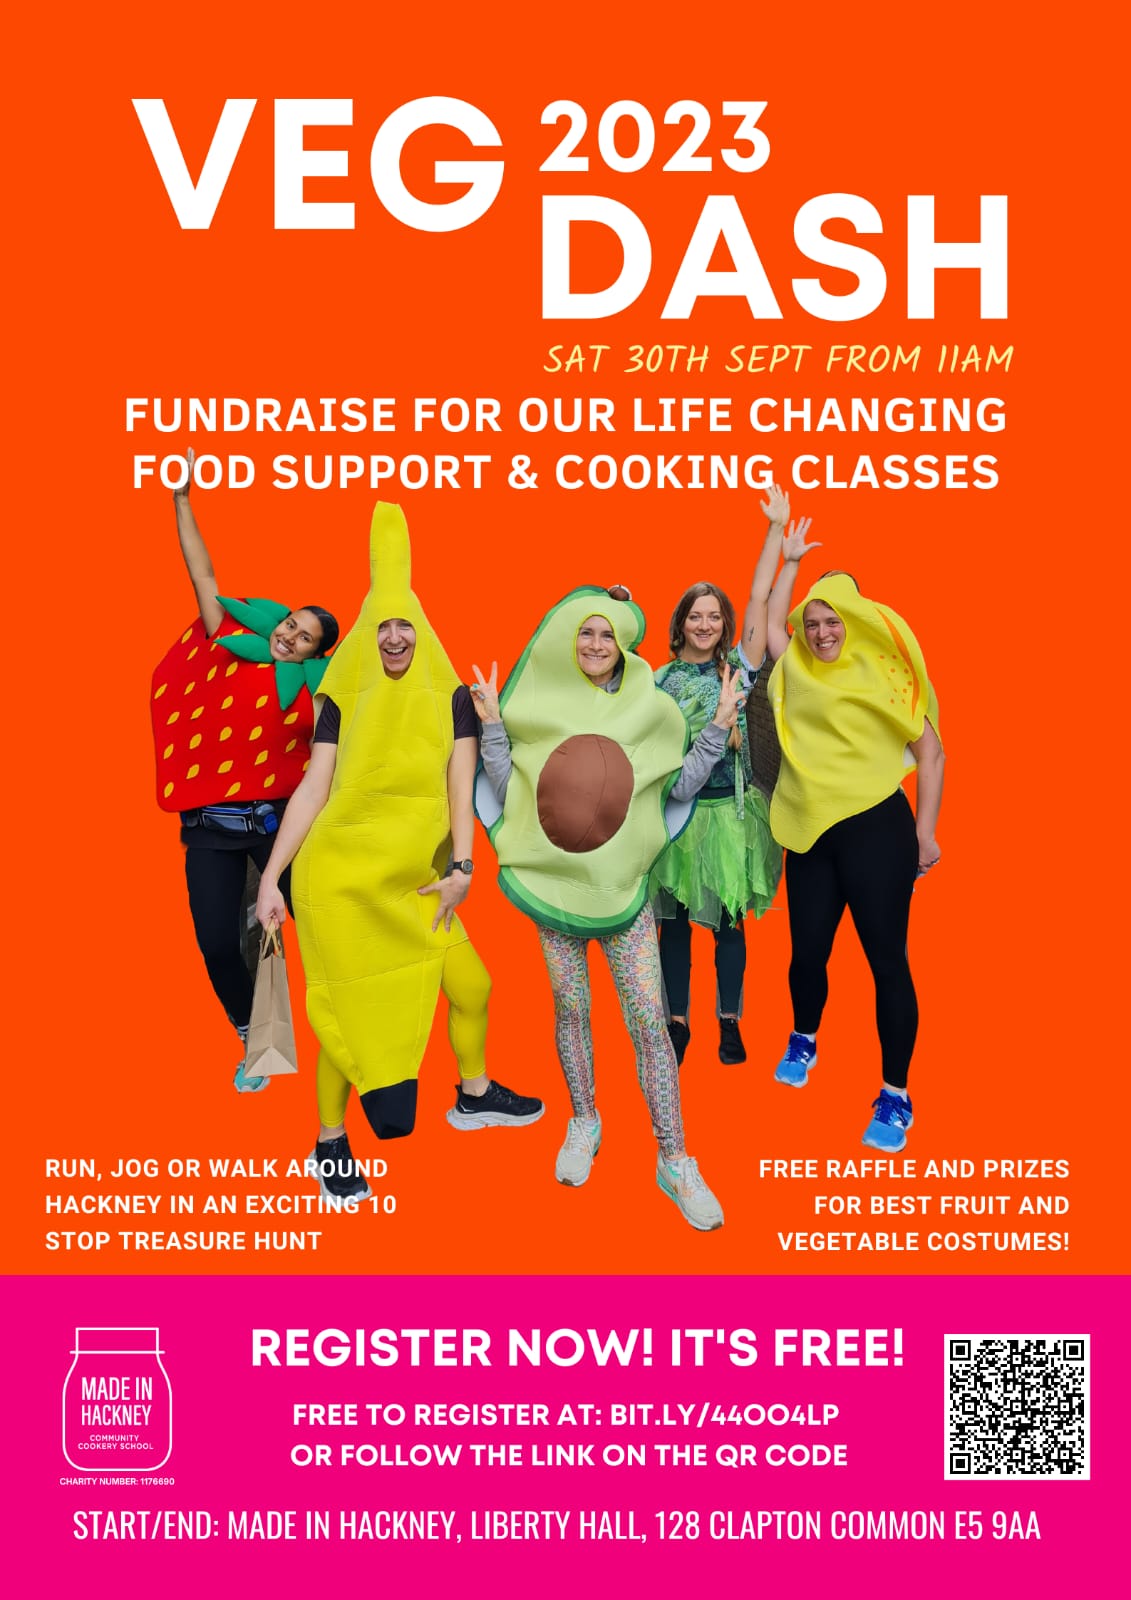 Join our exciting Veg Dash - Saturday September 30th 2023!